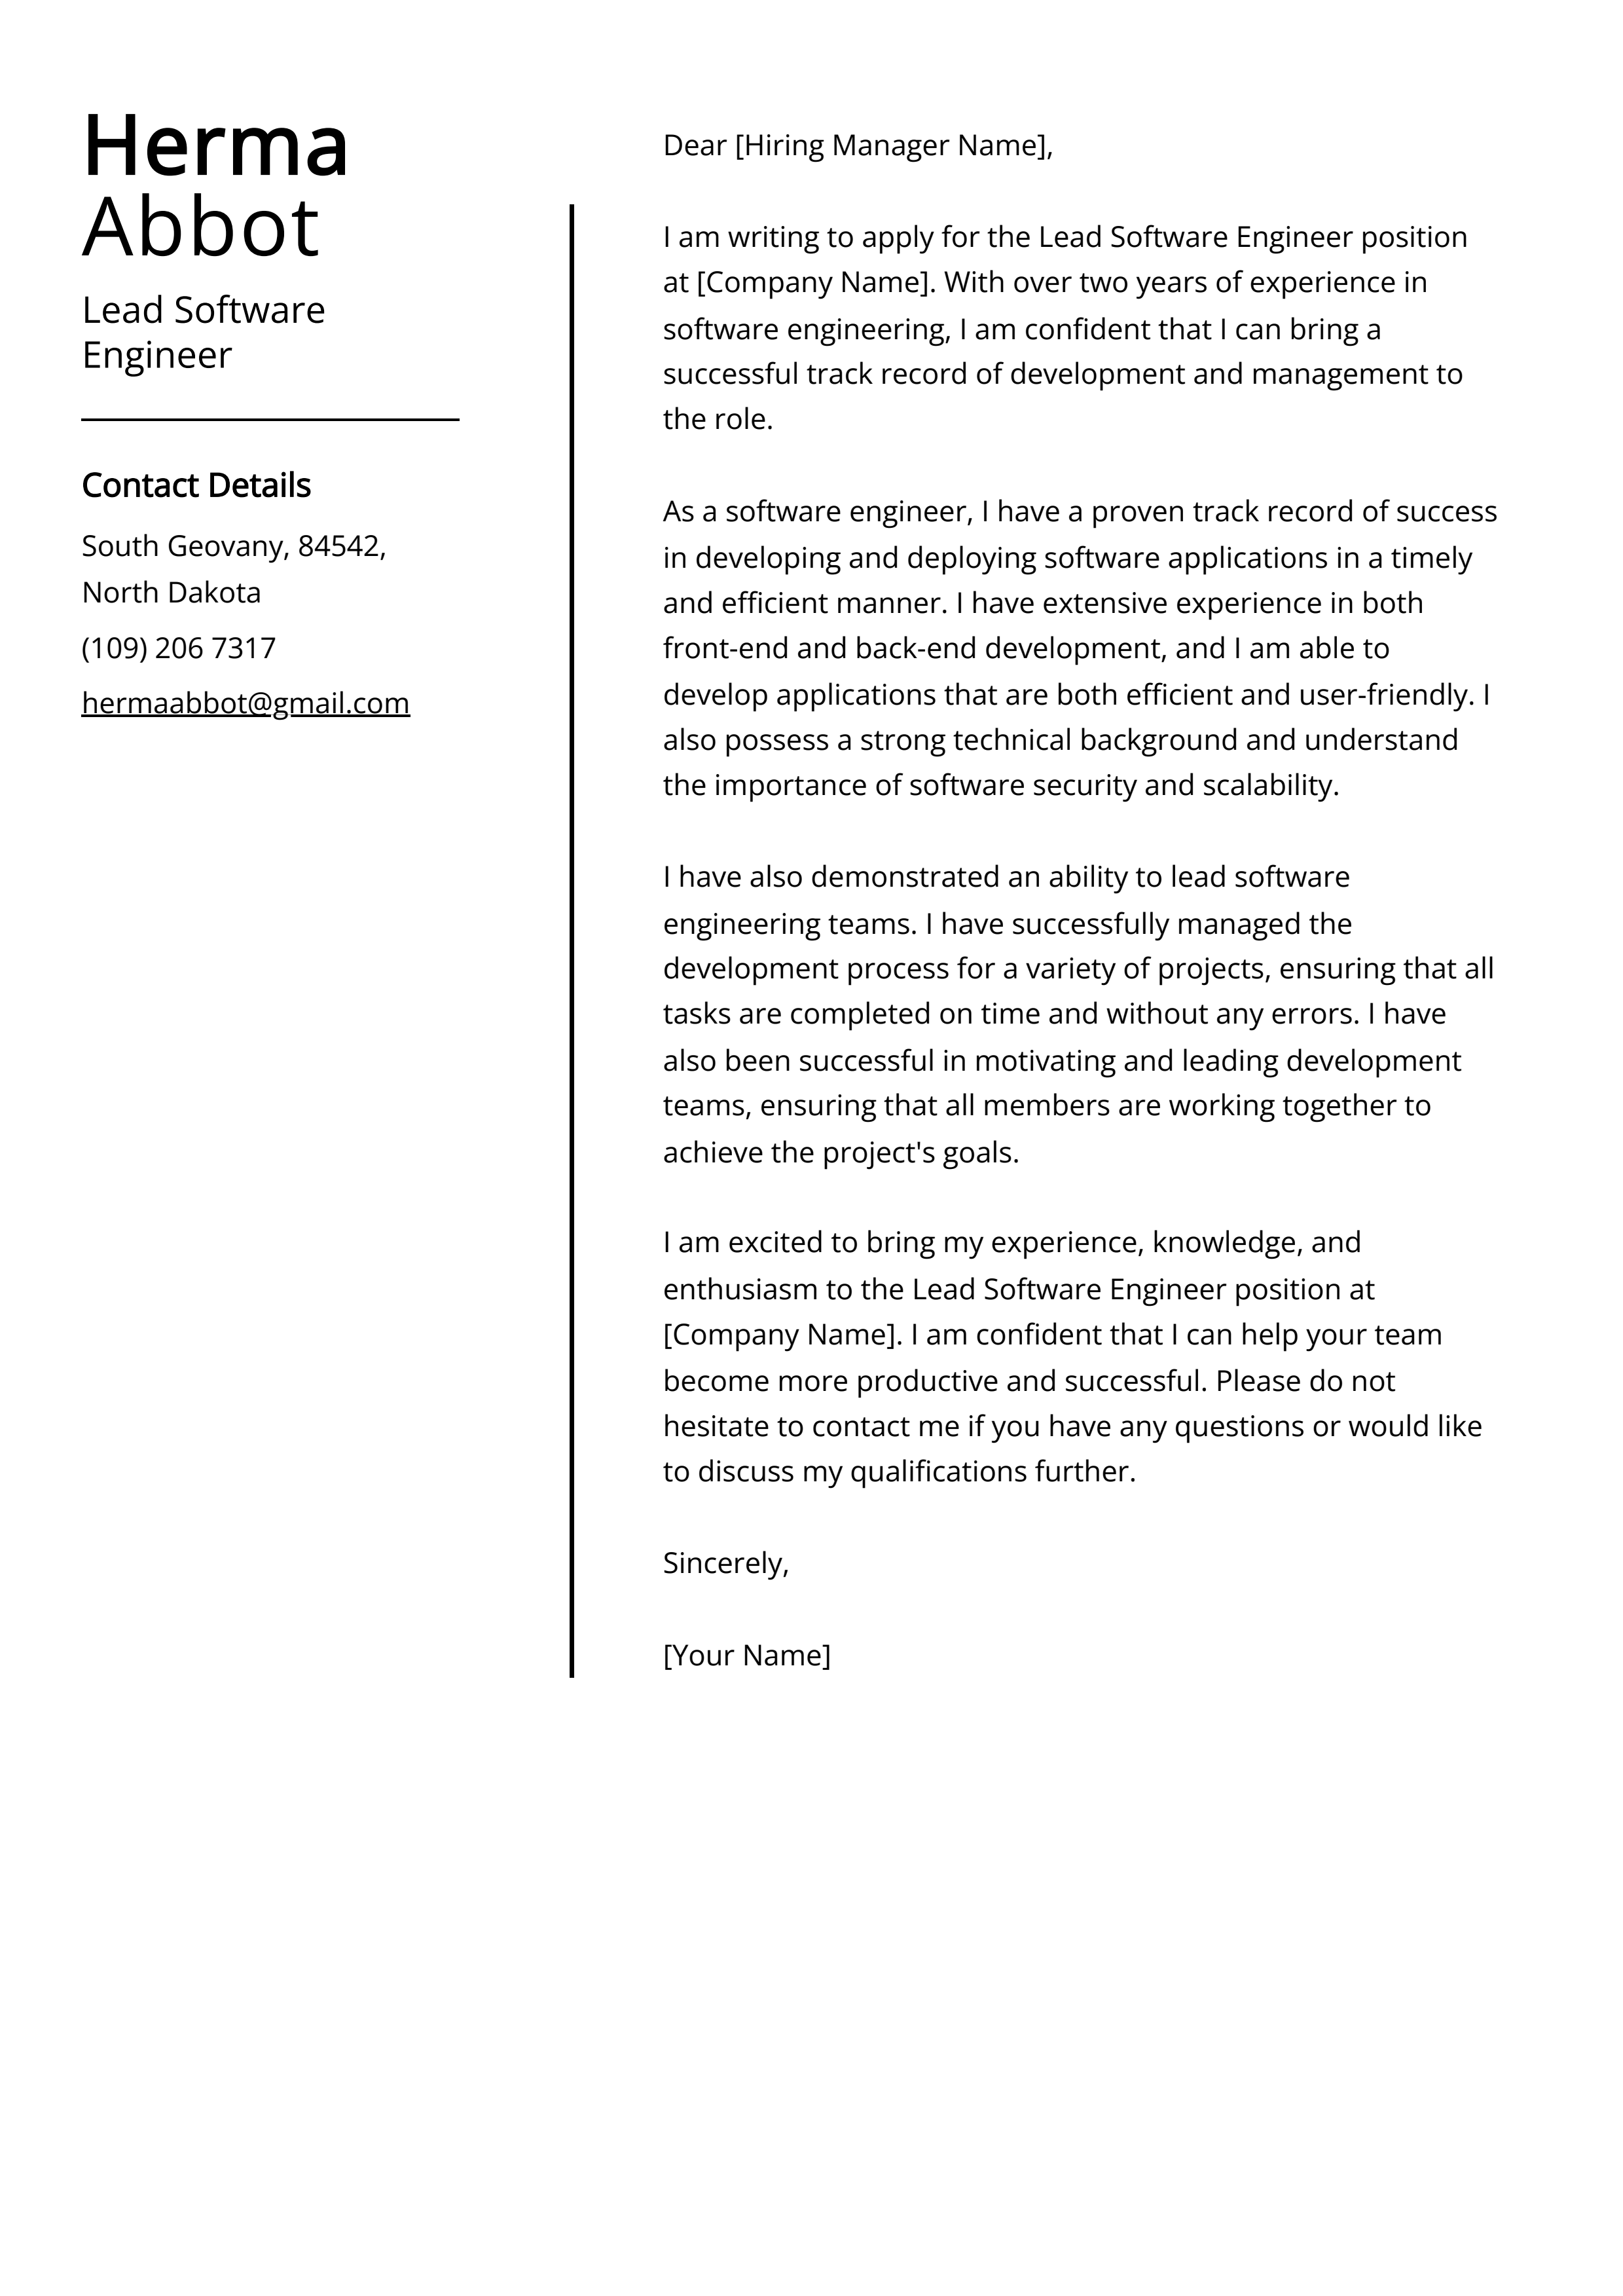 Lead Software Engineer Cover Letter Example